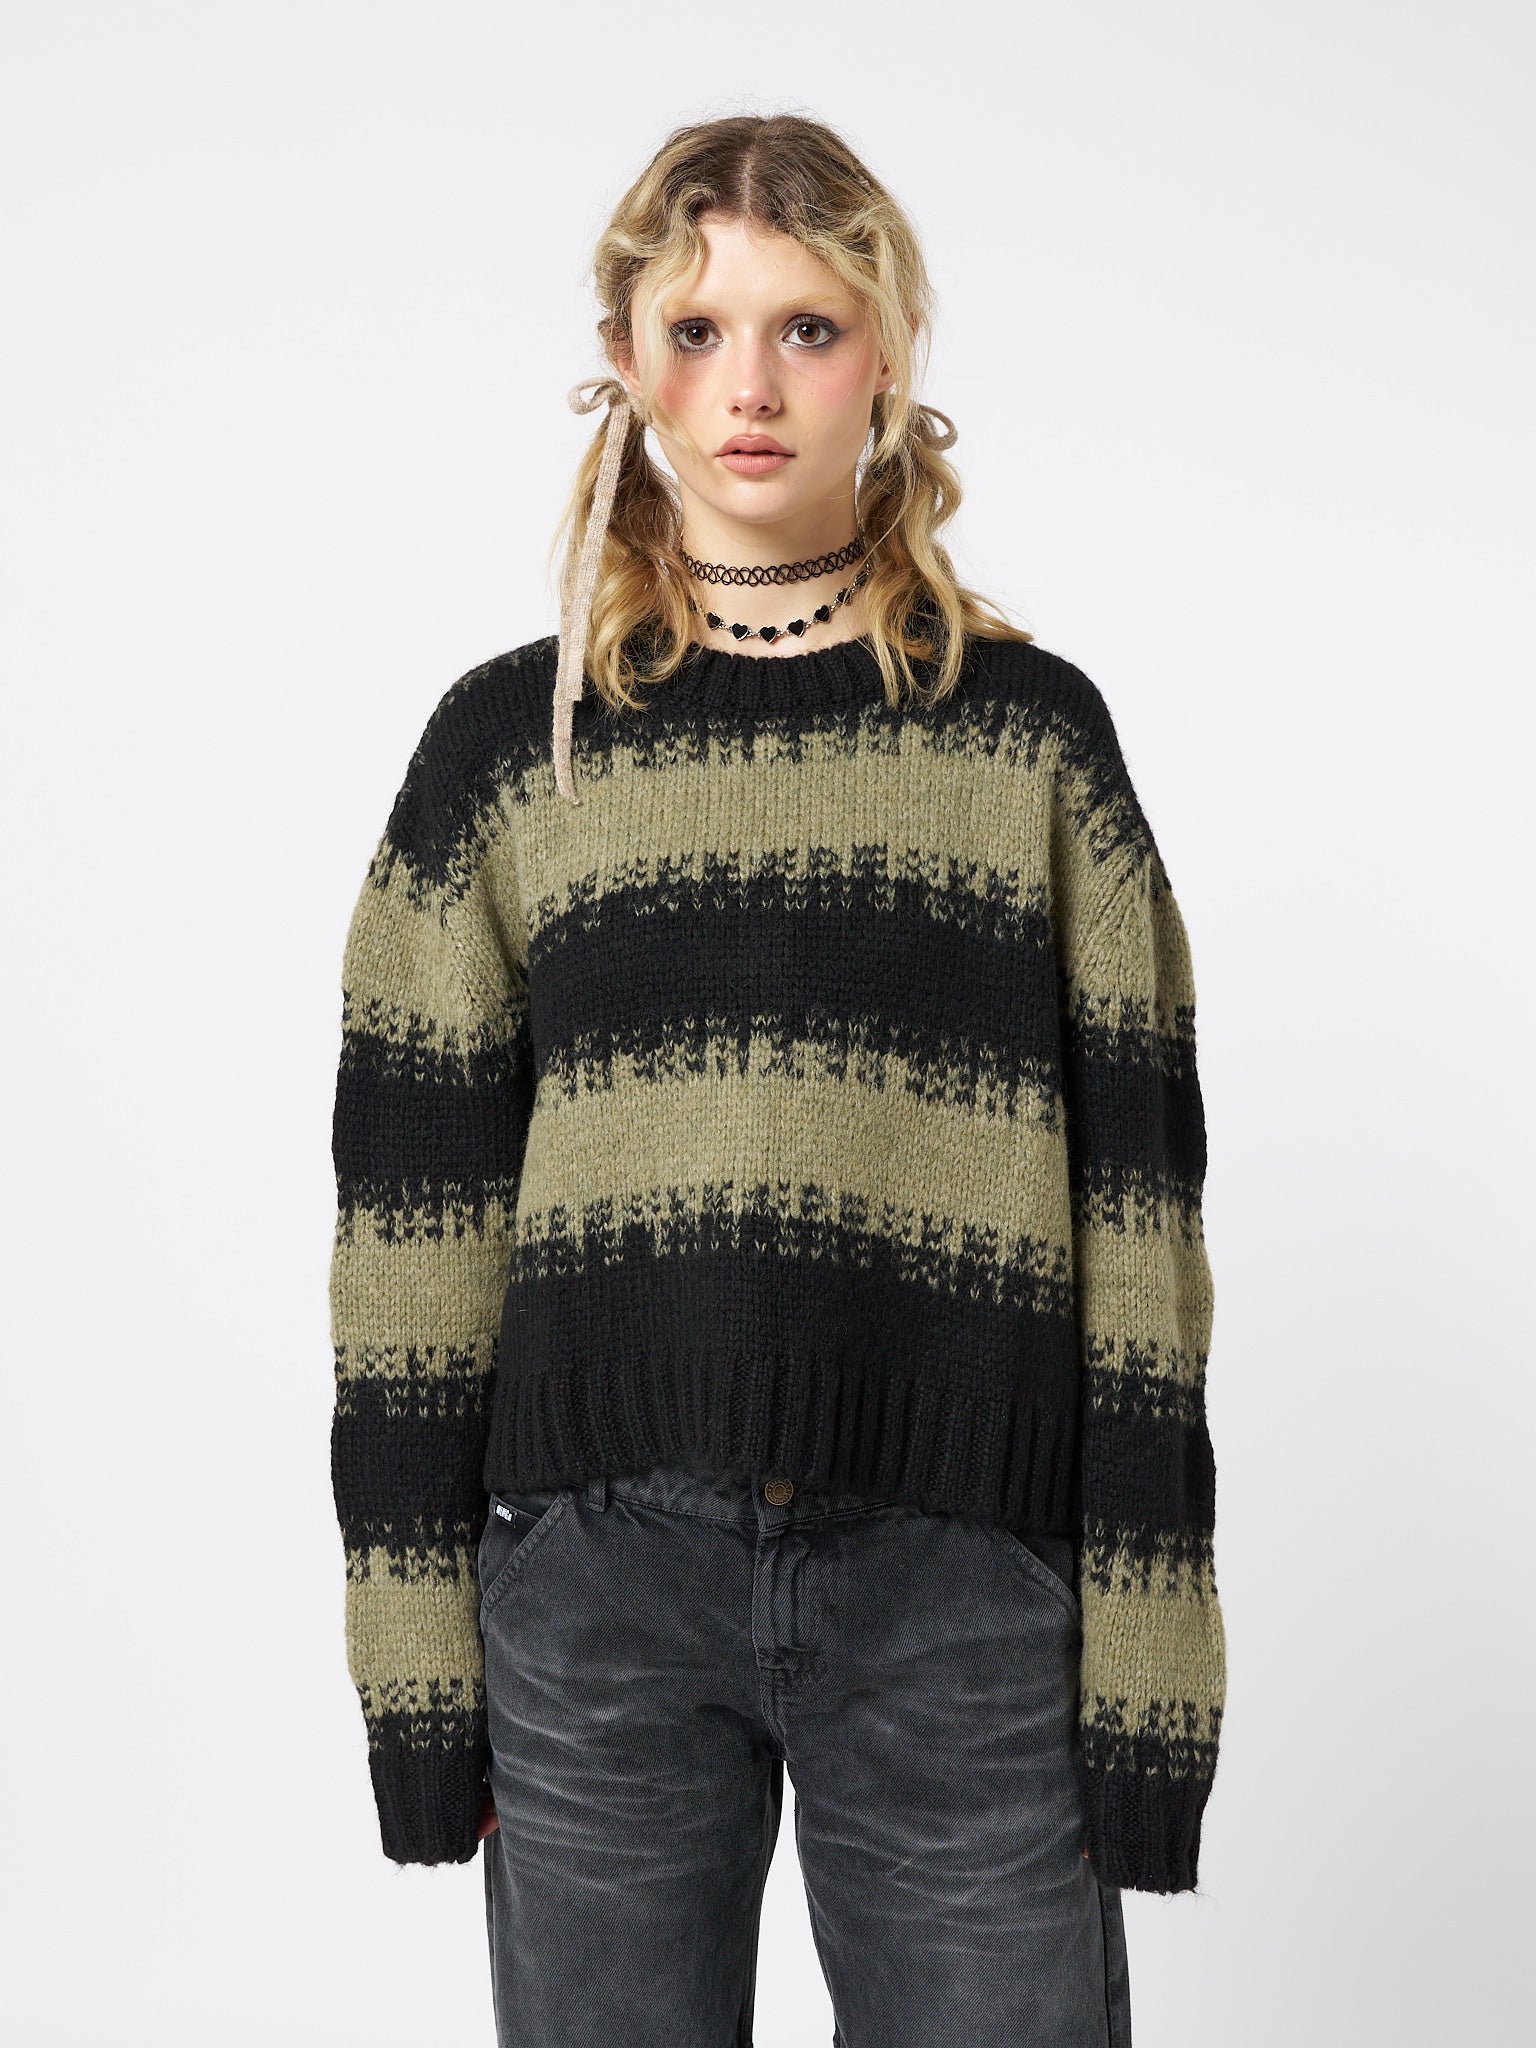  A trendy and stylish green and black striped cropped knit sweater.